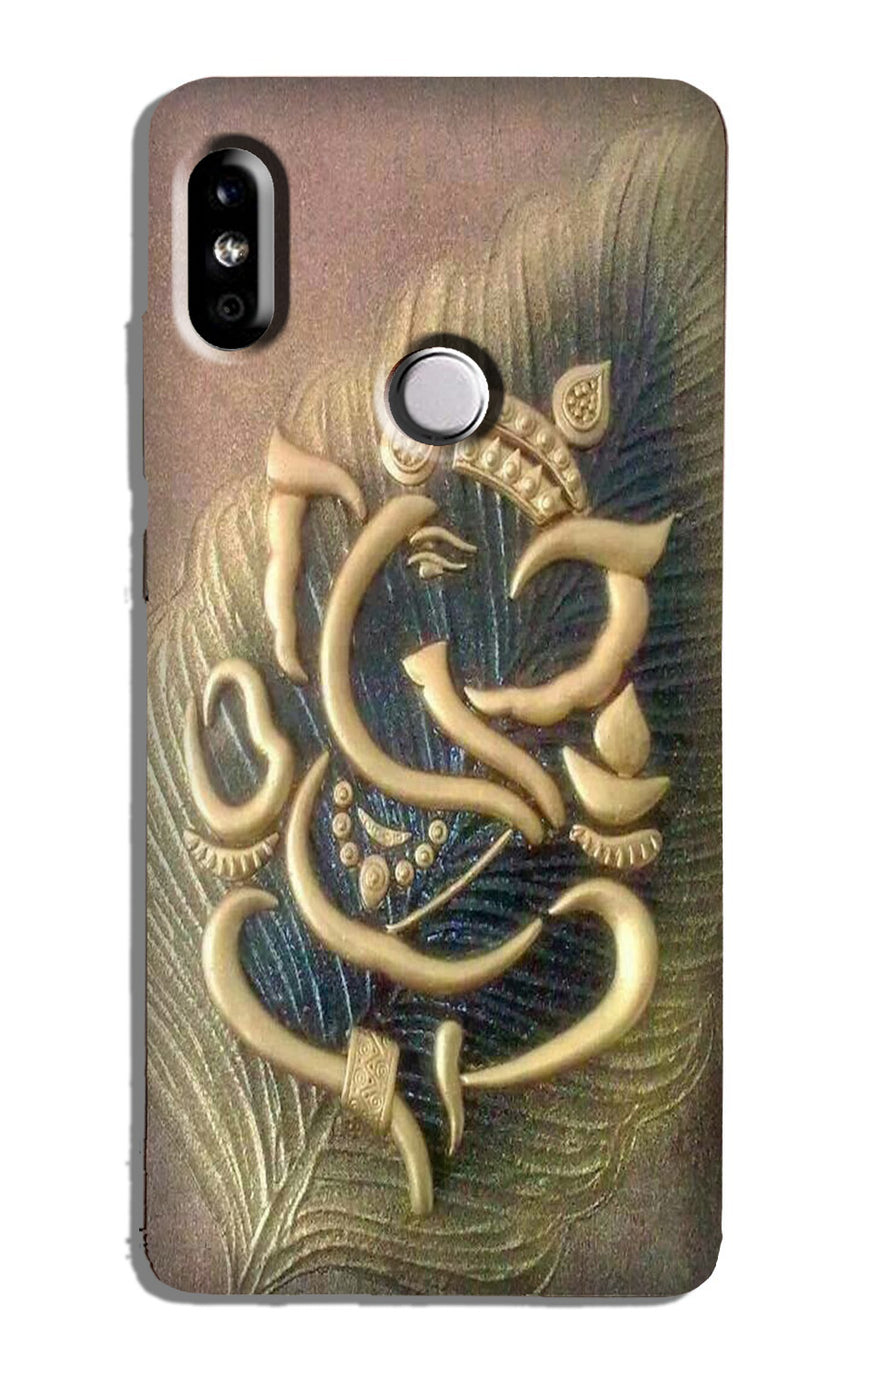 Lord Ganesha Case for Redmi 6 Pro